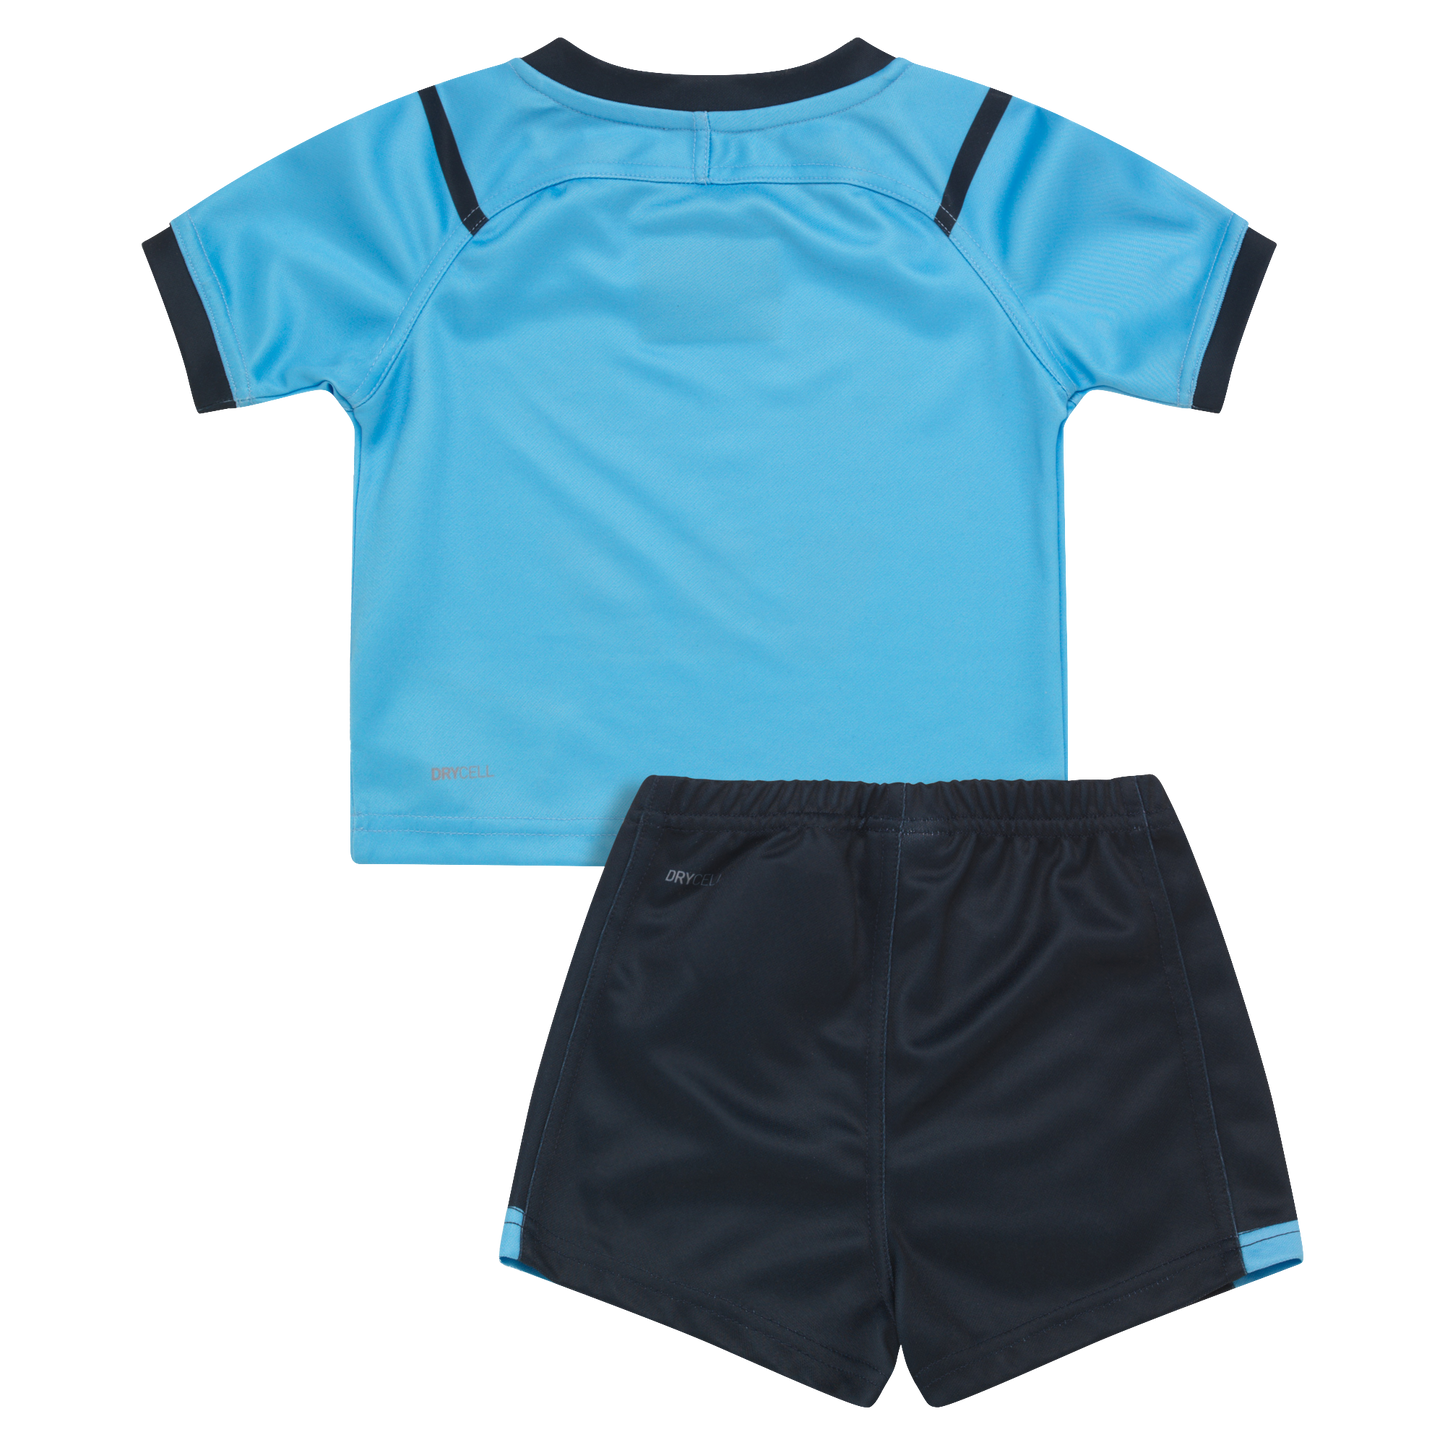 NSW Blues 2024 Infant Replica Home Jersey and Short Set